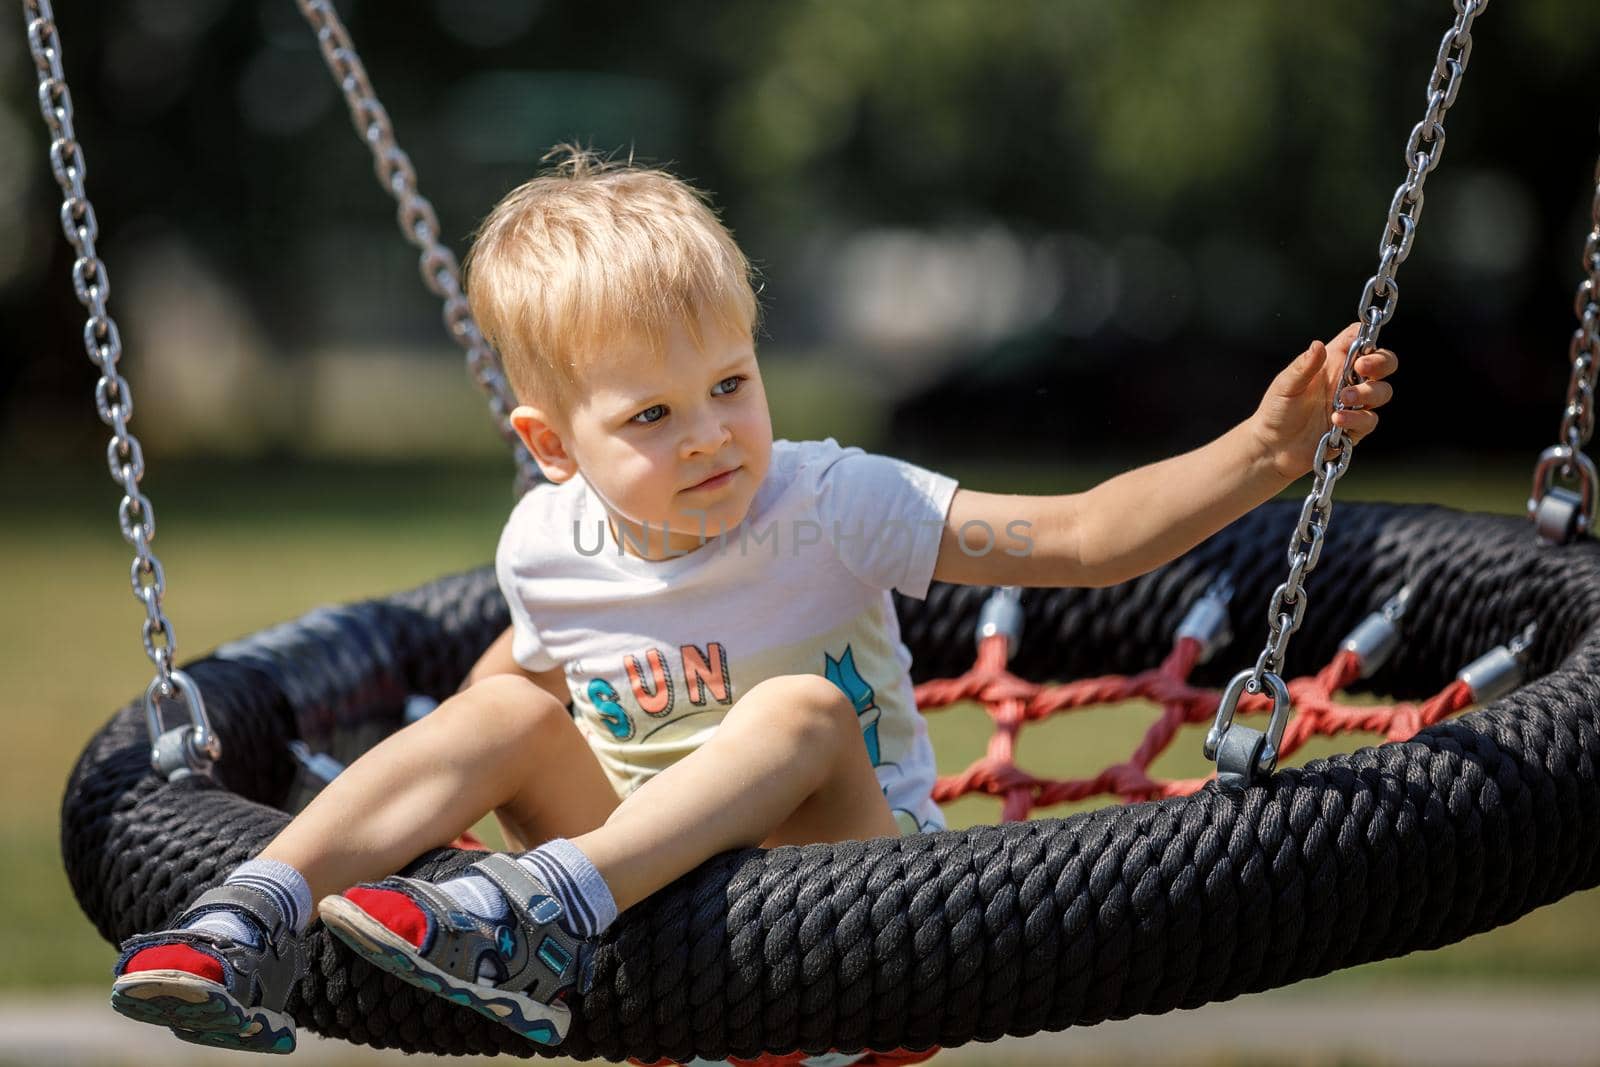 A cheerful little boy swings in the park on a swinging rope swing. Round black and red seat for children's swing.